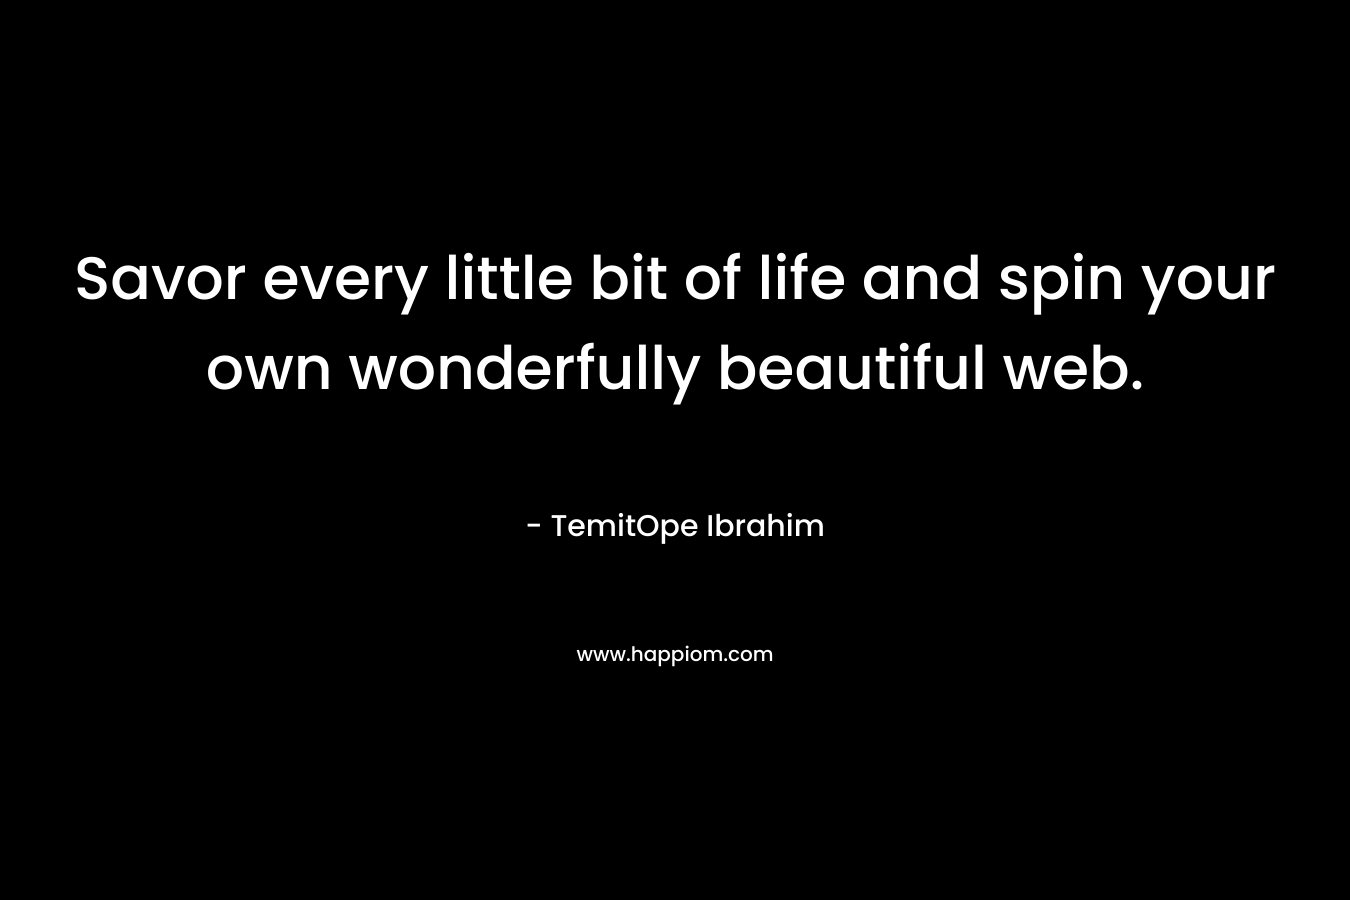 Savor every little bit of life and spin your own wonderfully beautiful web.